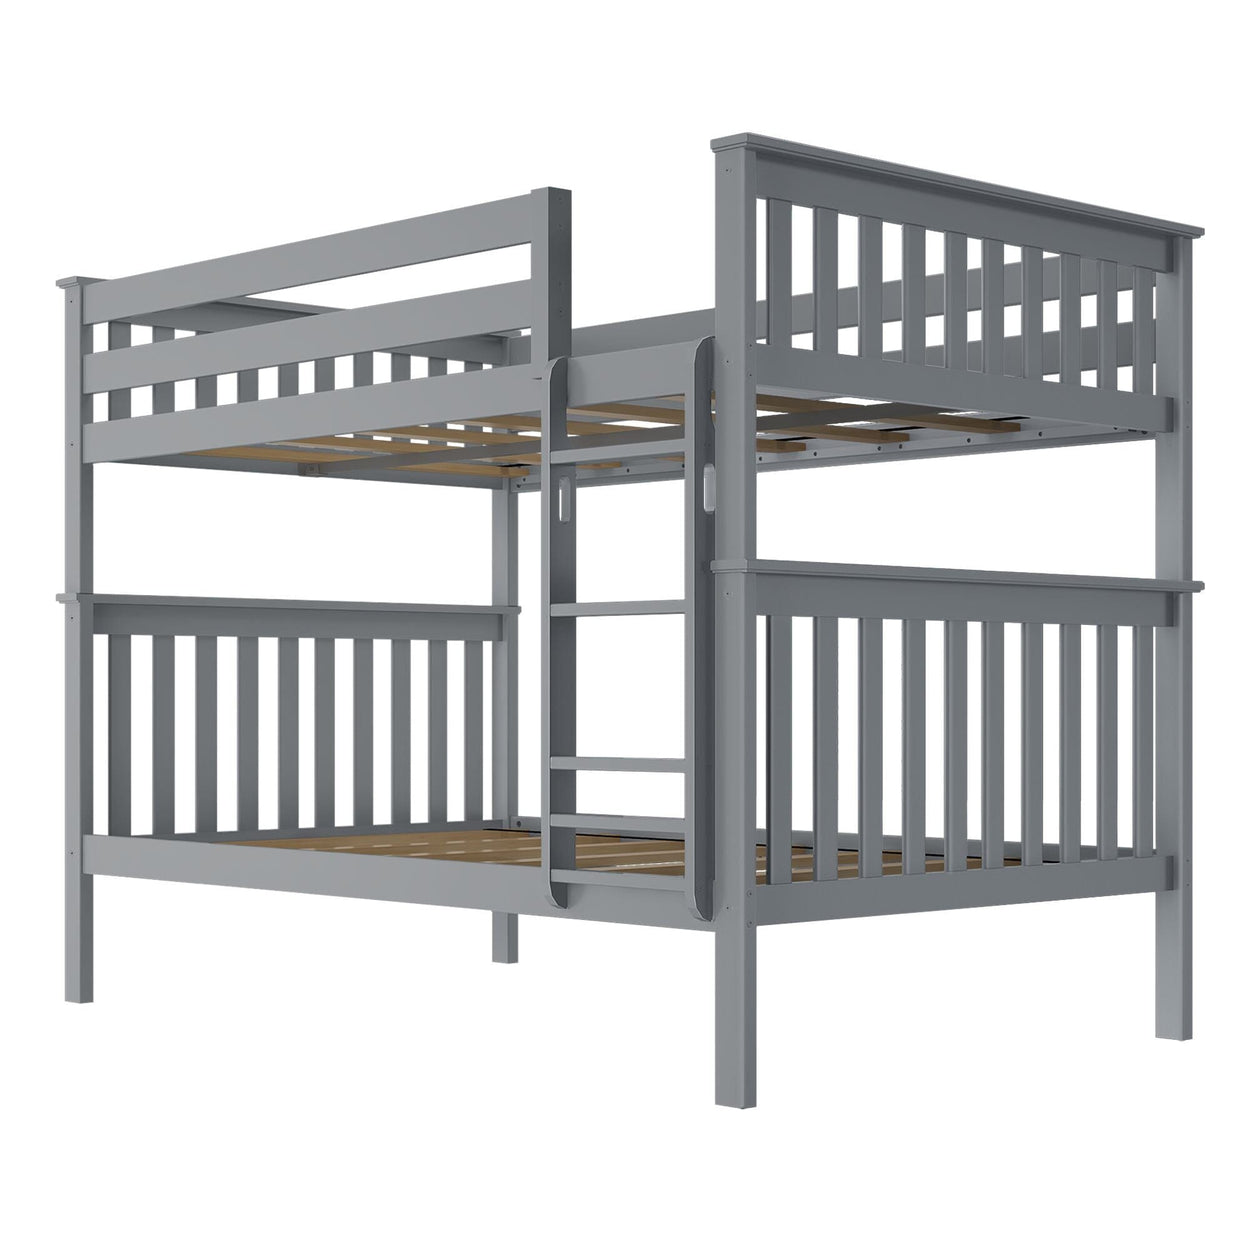 180251-121 : Bunk Beds Full over Full Bunk Bed, Grey